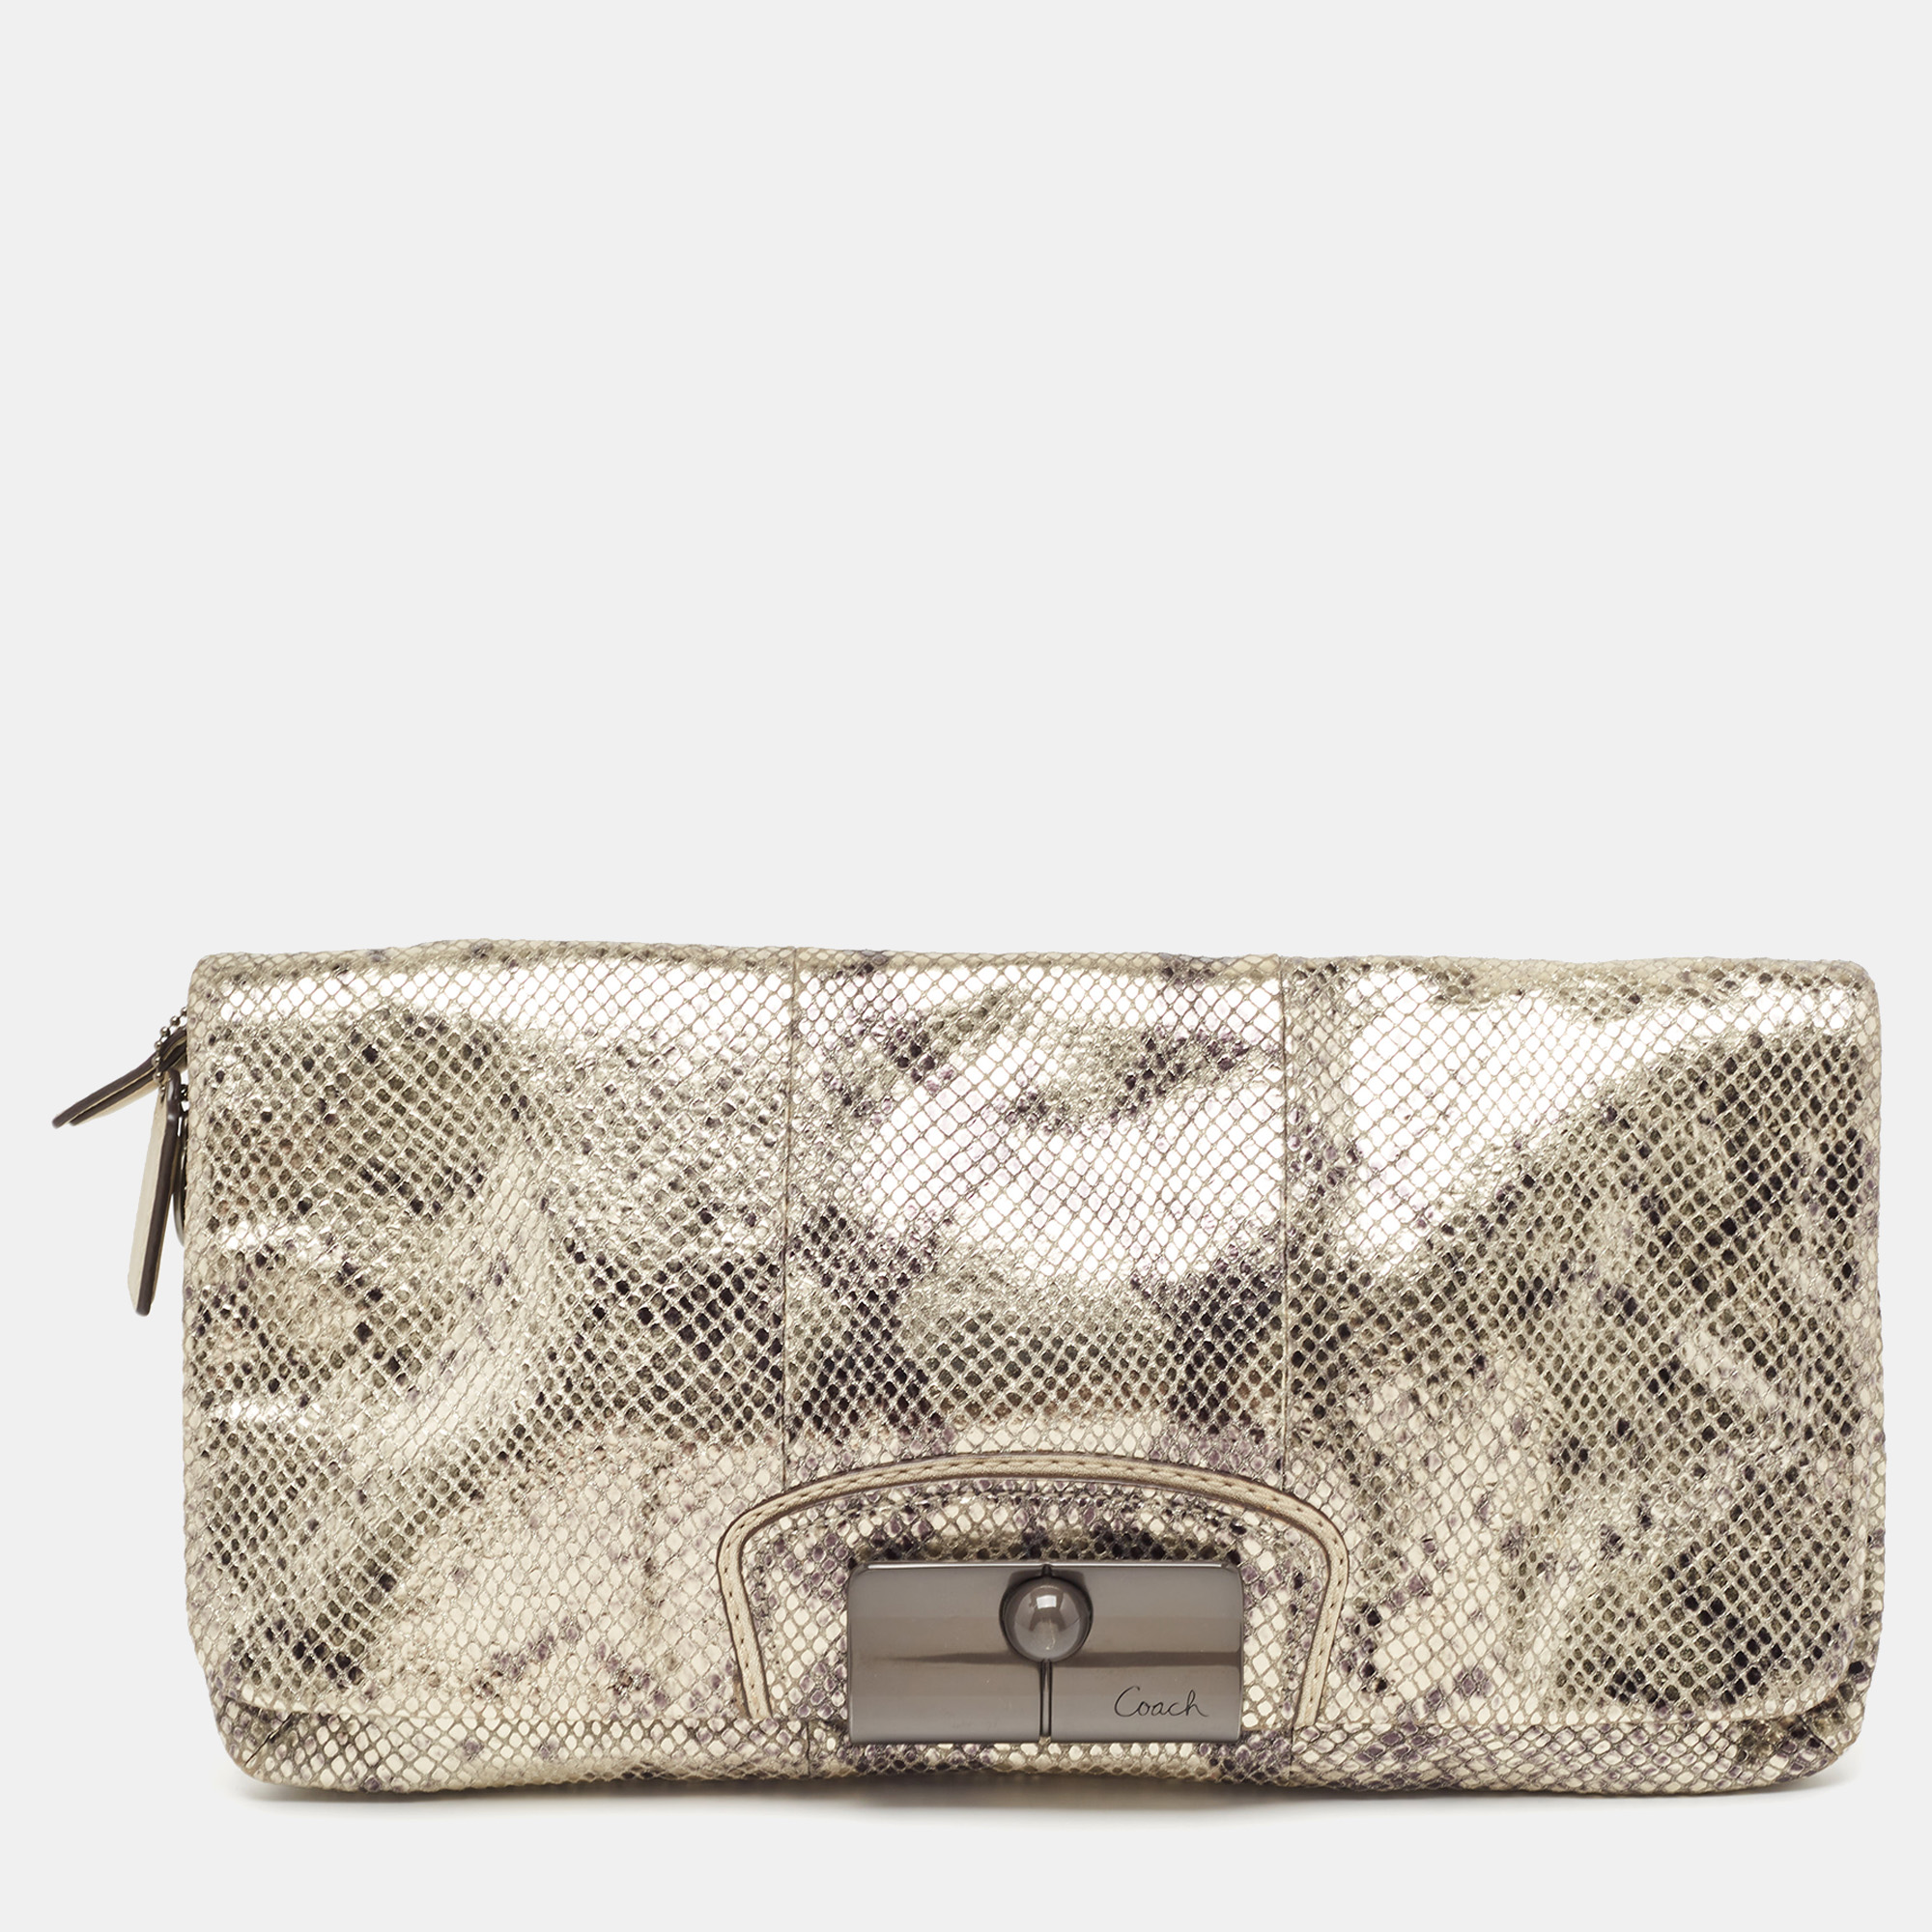 Pre-owned Coach Metallic Silver/black Python Embossed Leather Flap Clutch